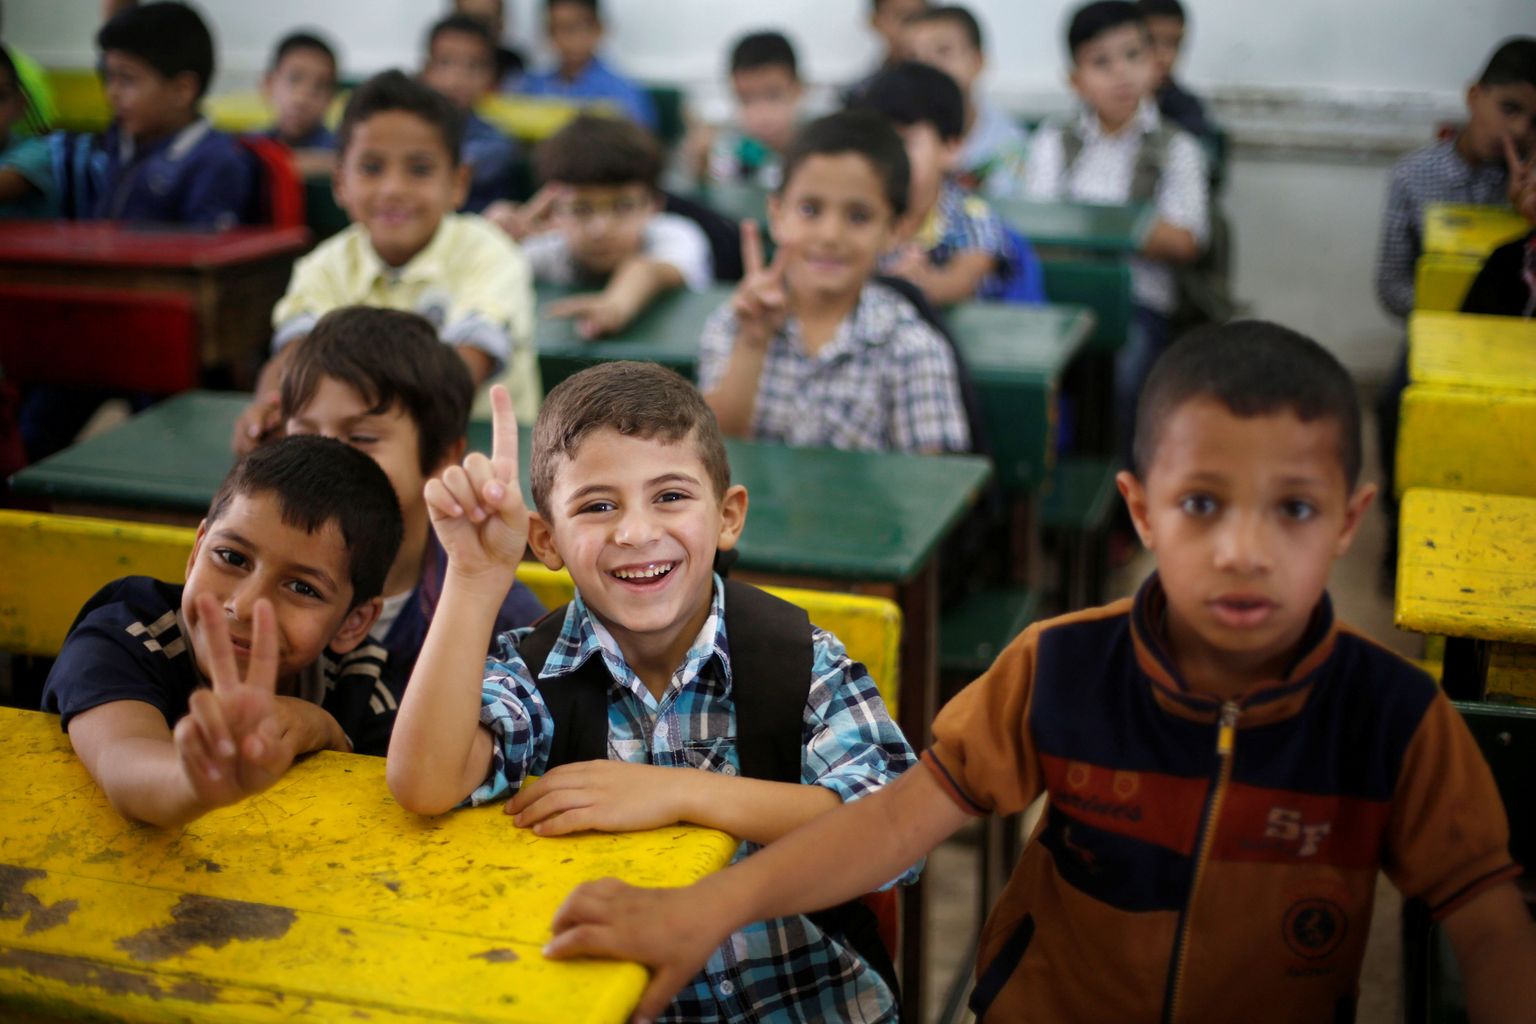 Refugee schoolchildren react to the camera as they attend a lesson in a classroom on the first day of the new school year at one of the UNRWA schools at a Palestinian refugee camp al Wehdat, in Amman, Jordan, September 1, 2016.  REUTERS/Muhammad Hamed